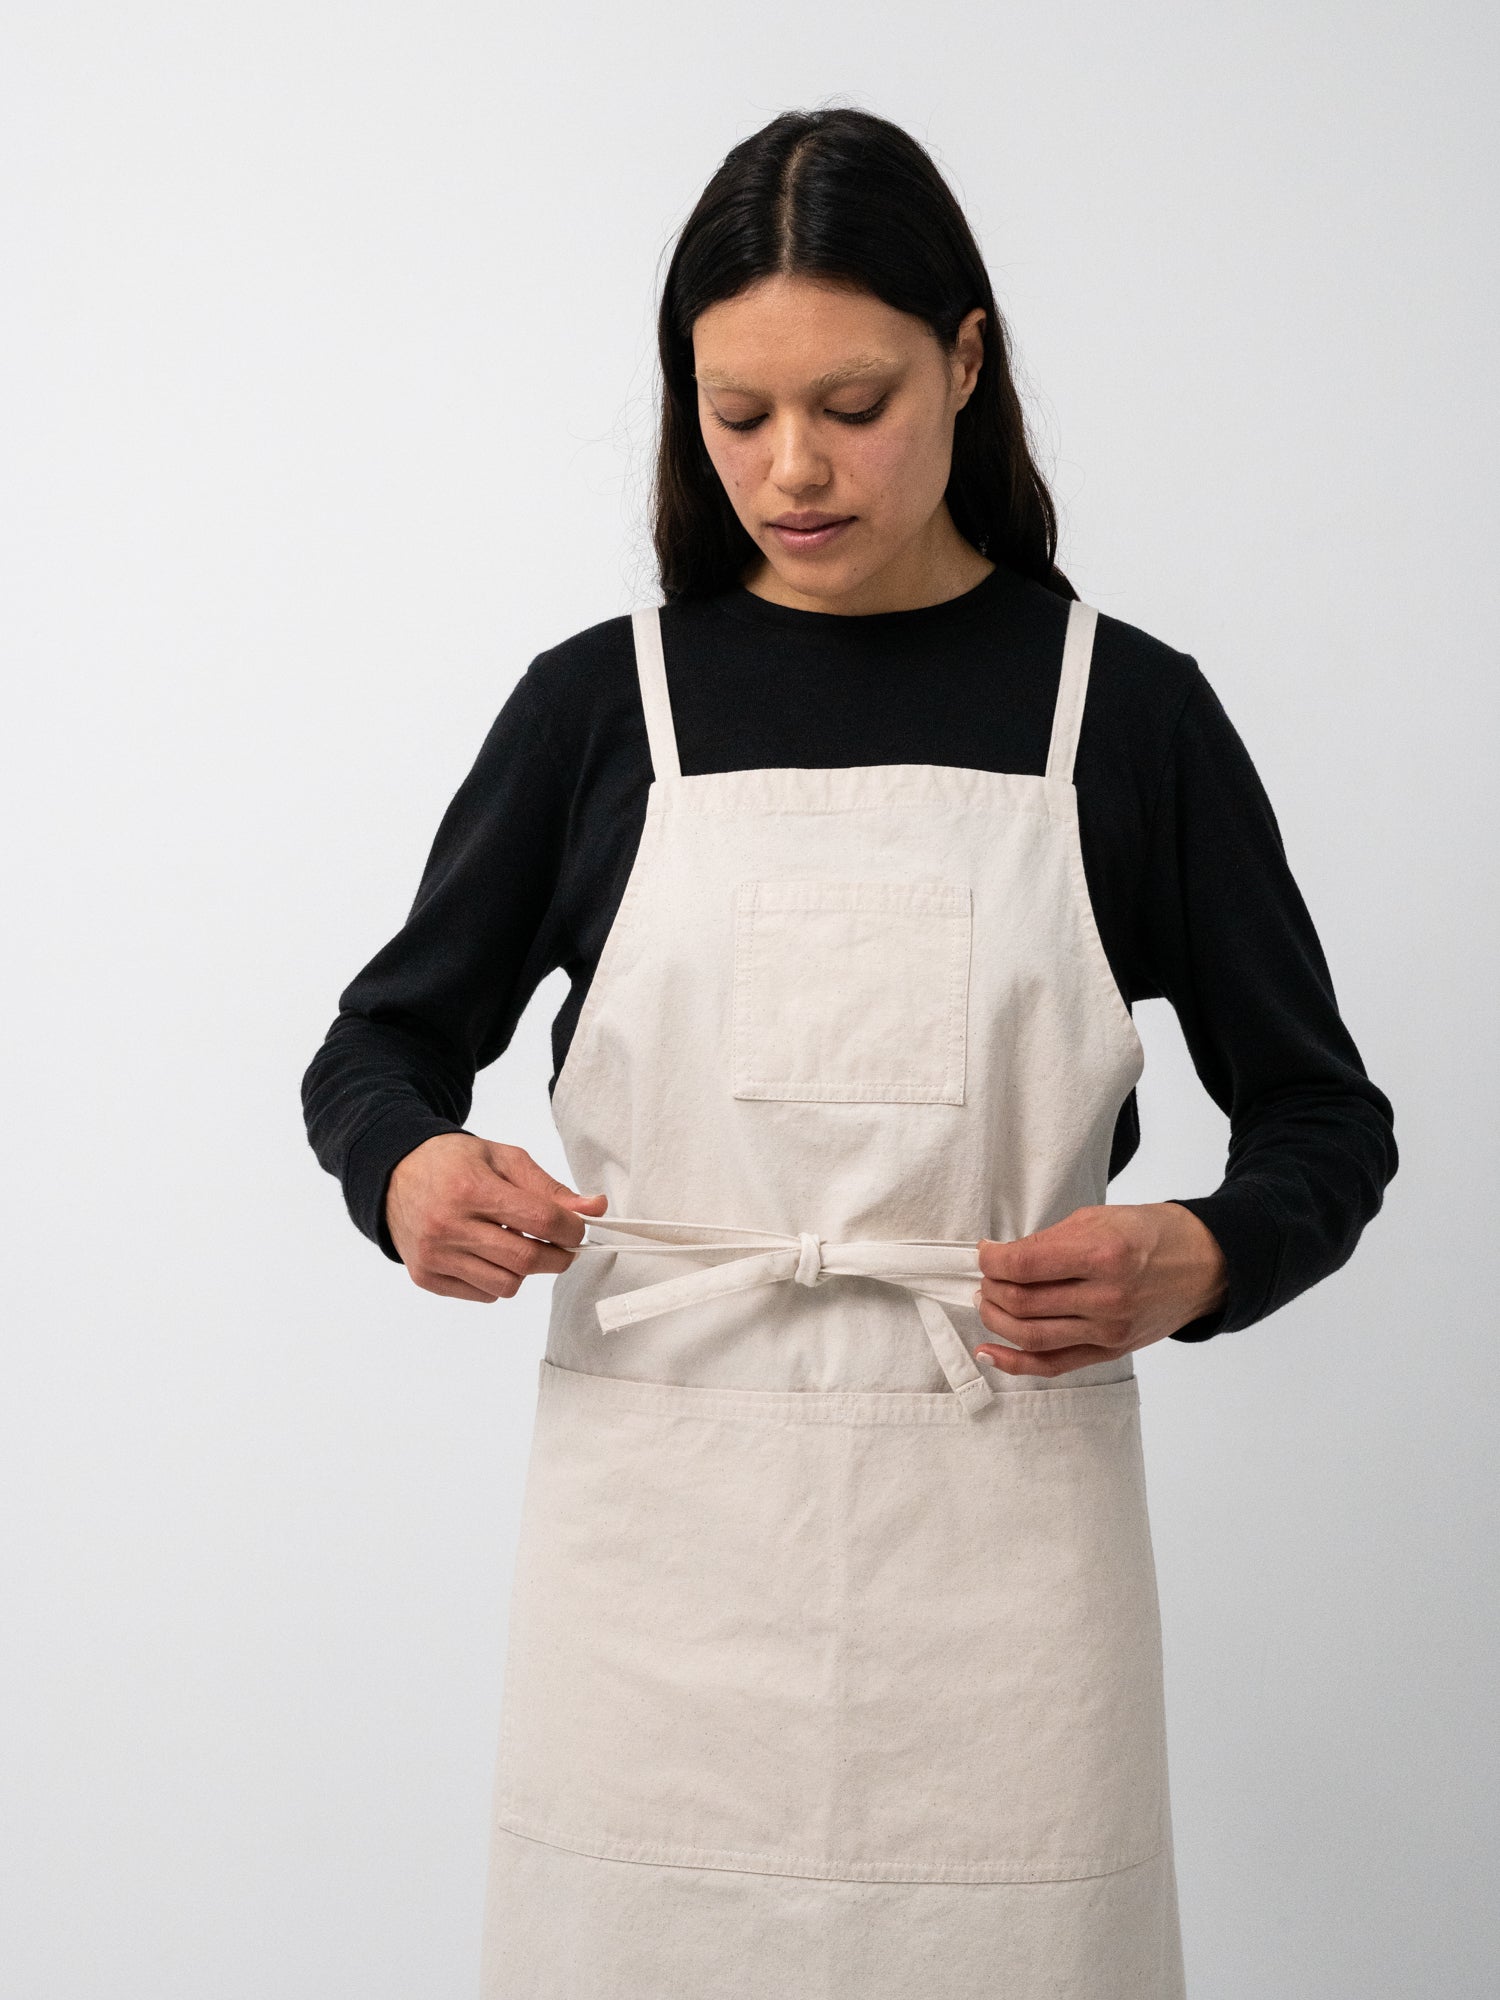 Dry Apron Panties: A Review and Interview with Creator CarolAnn